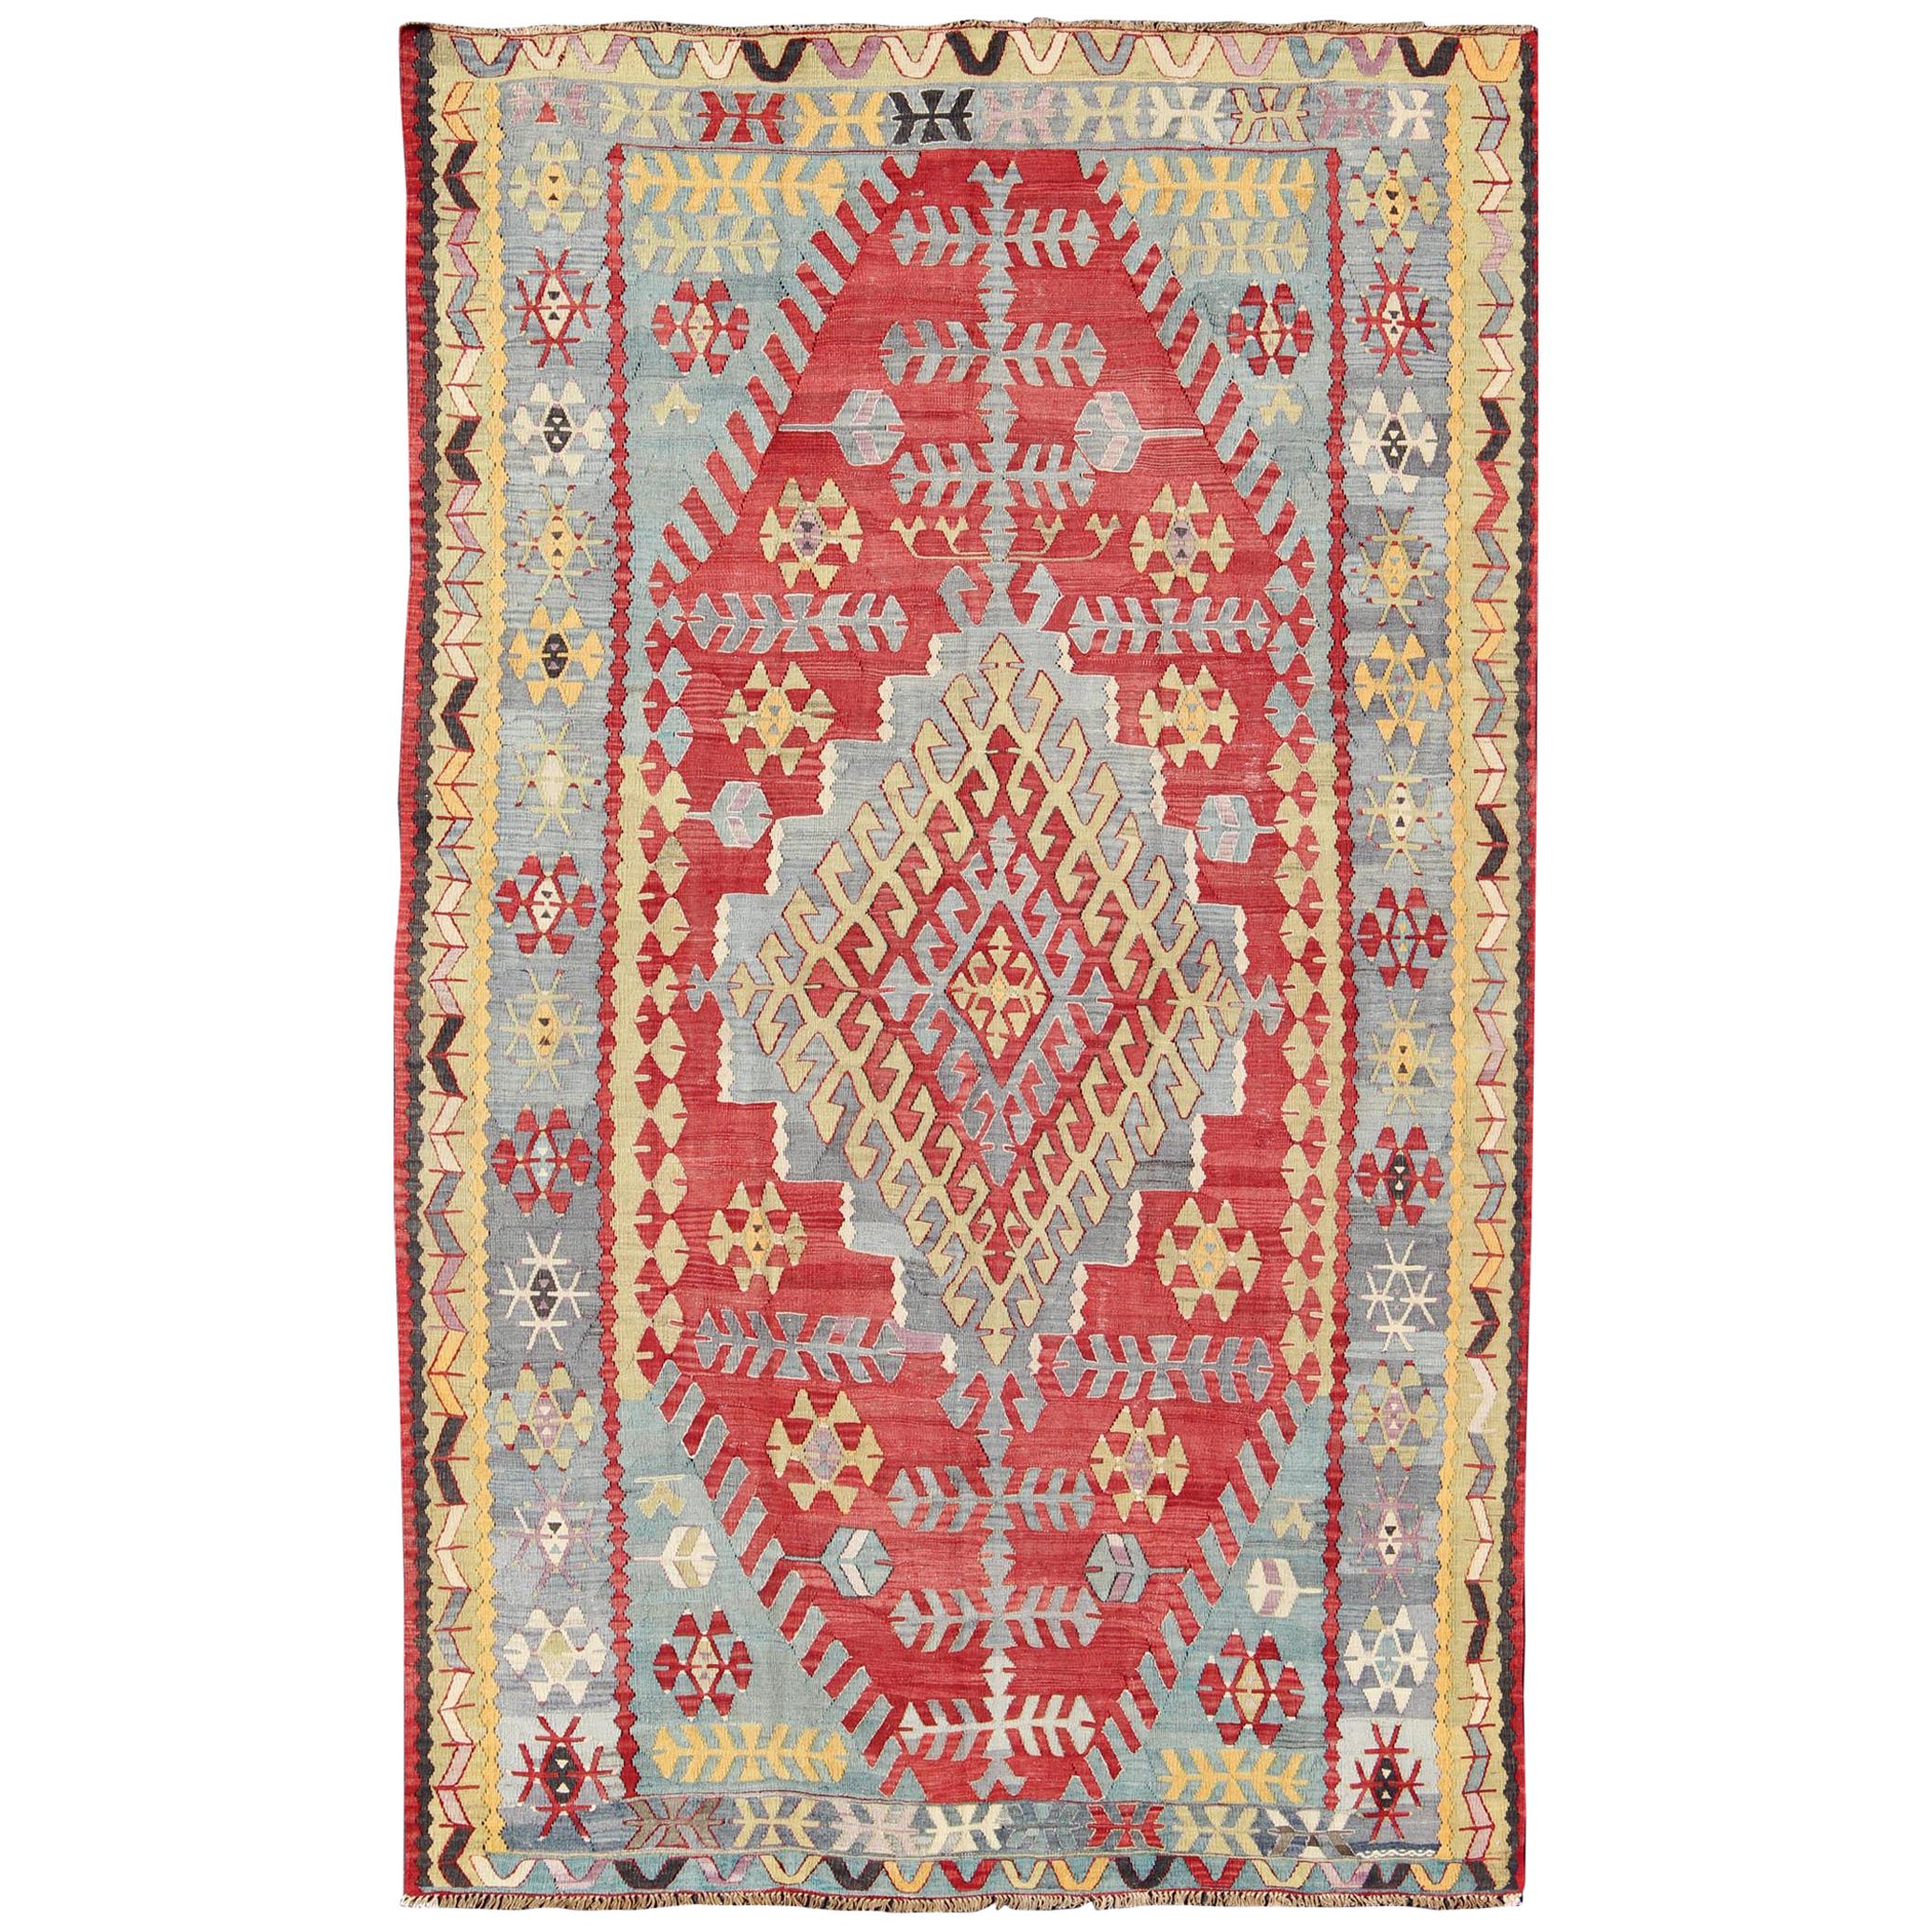 Vintage Turkish Kilim Flat-Weave Rug with Geometric Design in Red, Yellow, Green For Sale